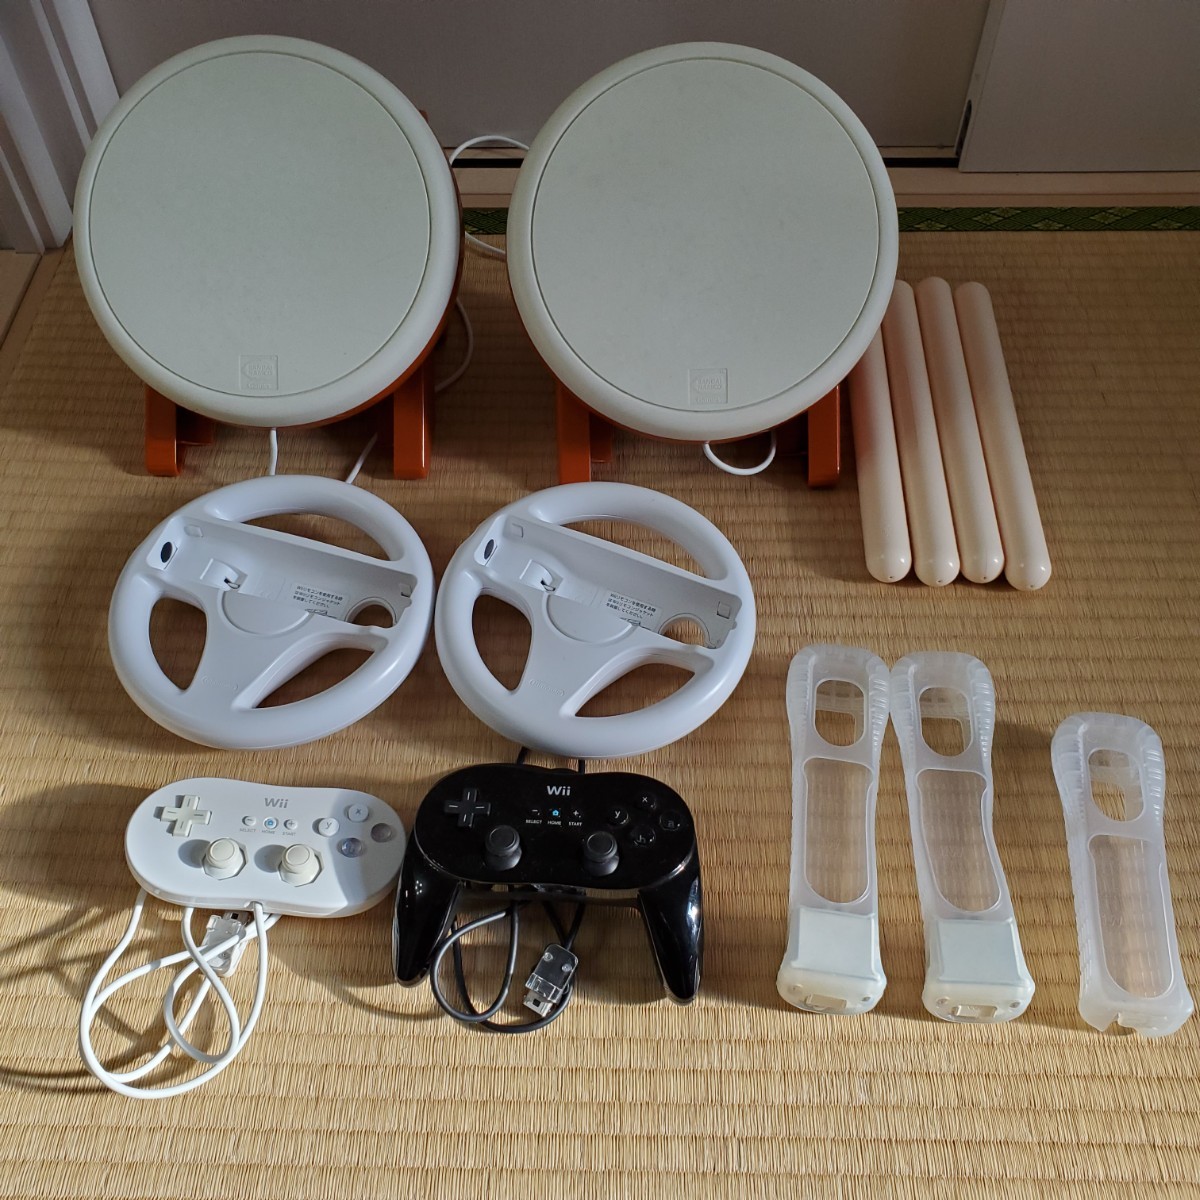 Wii ソフト11本セット　タタコンコントローラーセット